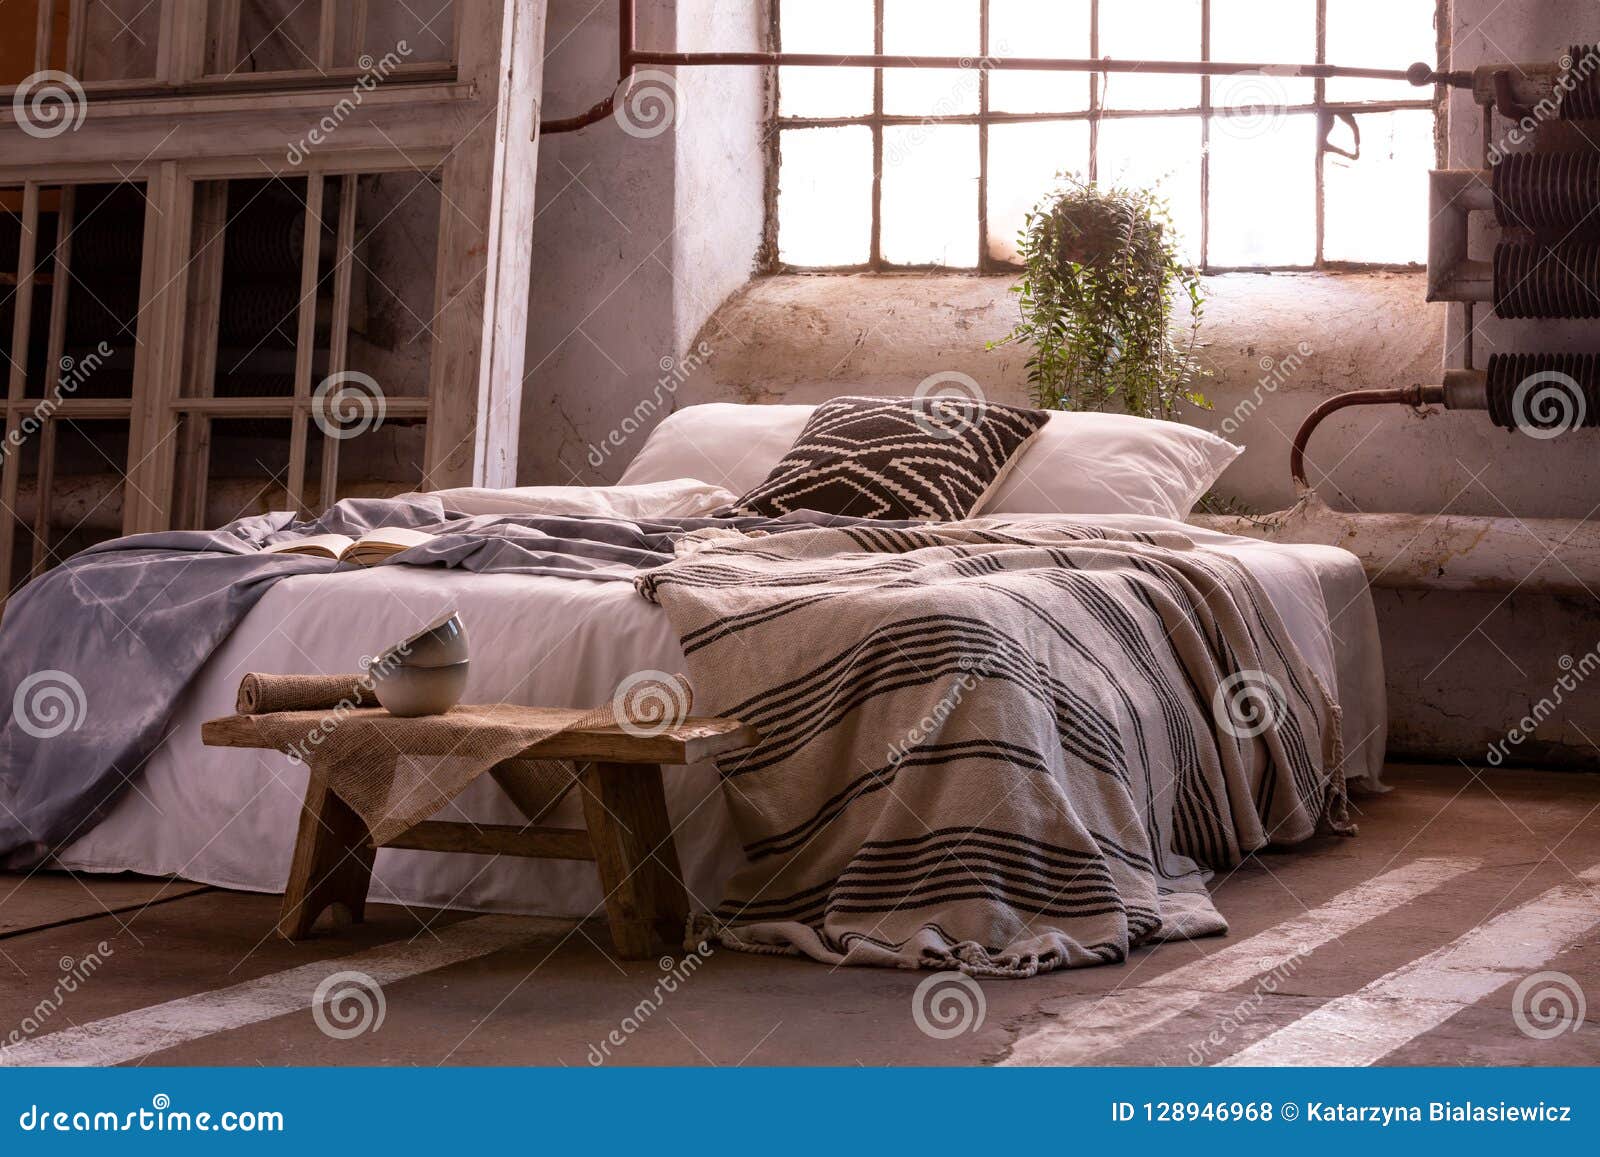 bed with pillows and blanket, wooden stool and plant in a wabi sabi bedroom